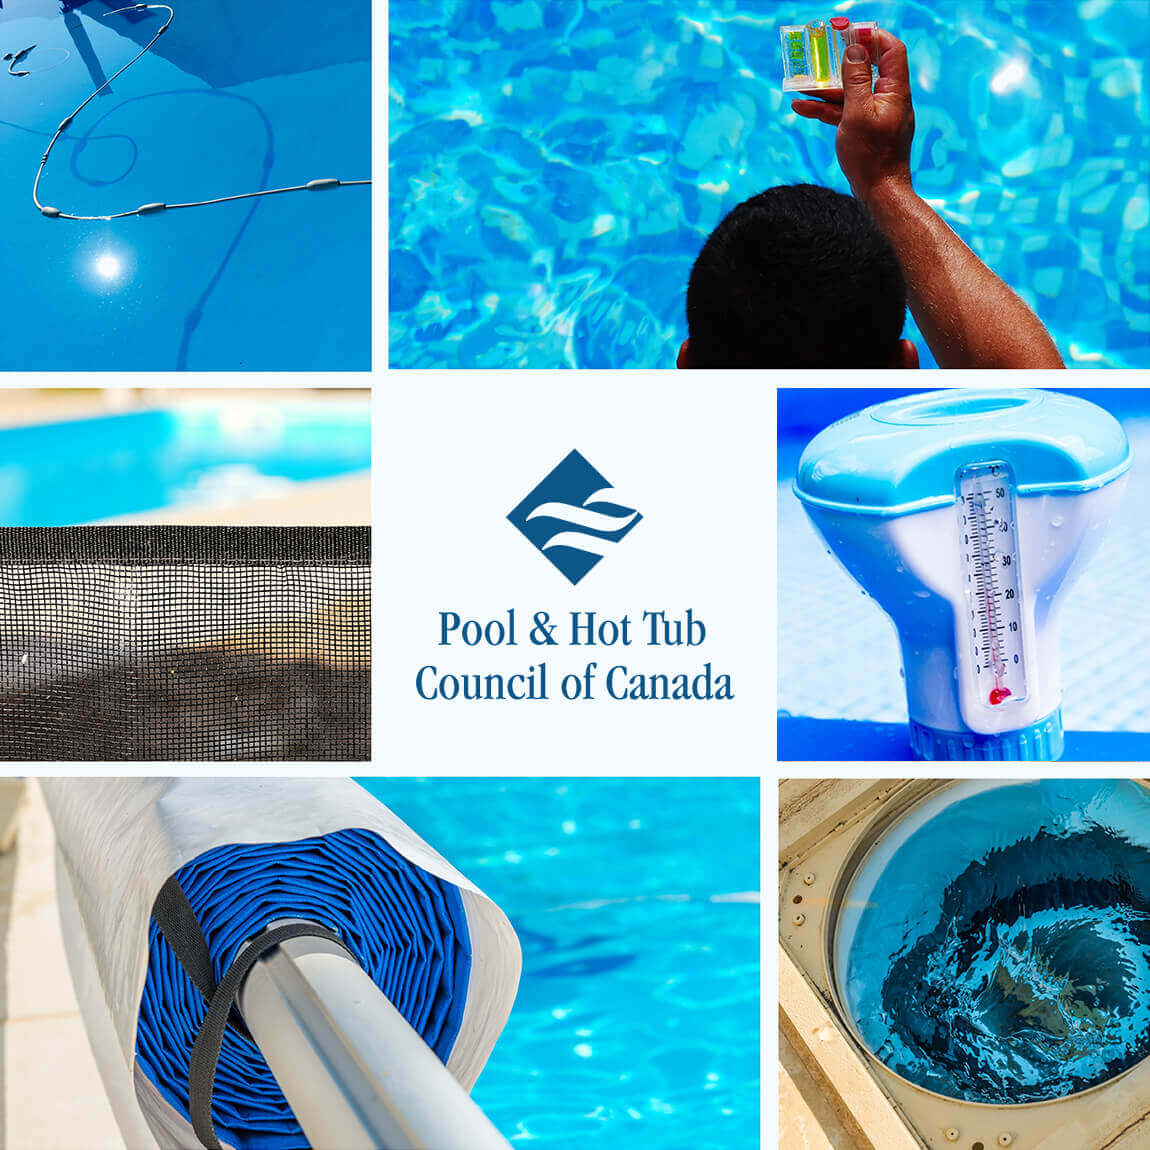 Banner for the Pool & Hot Tub Council of Canada